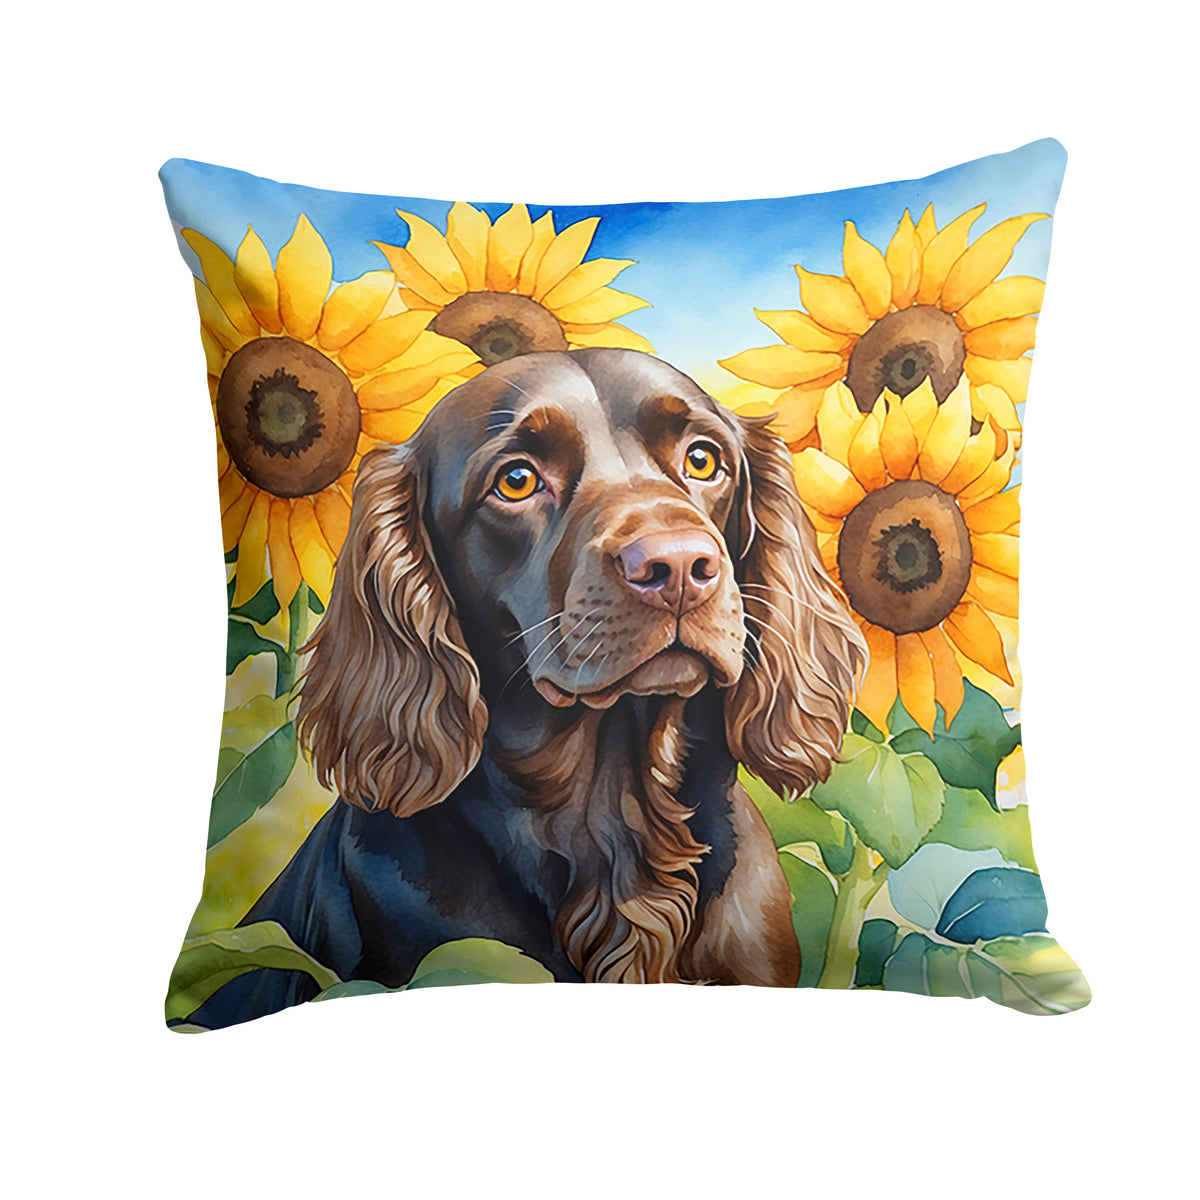 Buy this Boykin Spaniel in Sunflowers Throw Pillow